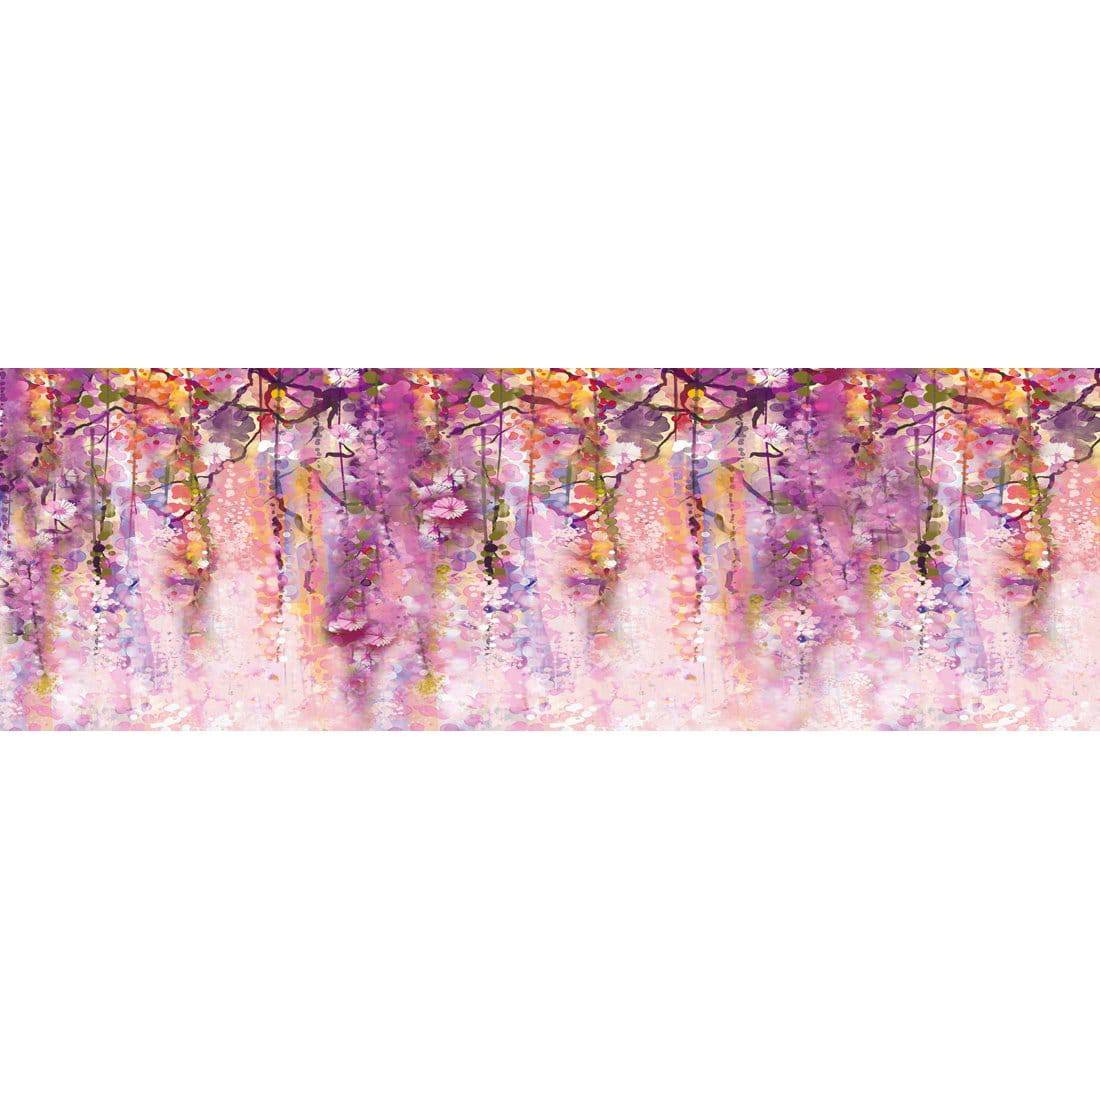 Lilac Dream, Long-Acrylic-Wall Art Design-With Border-Acrylic - No Frame-60x20cm-Wall Art Designs